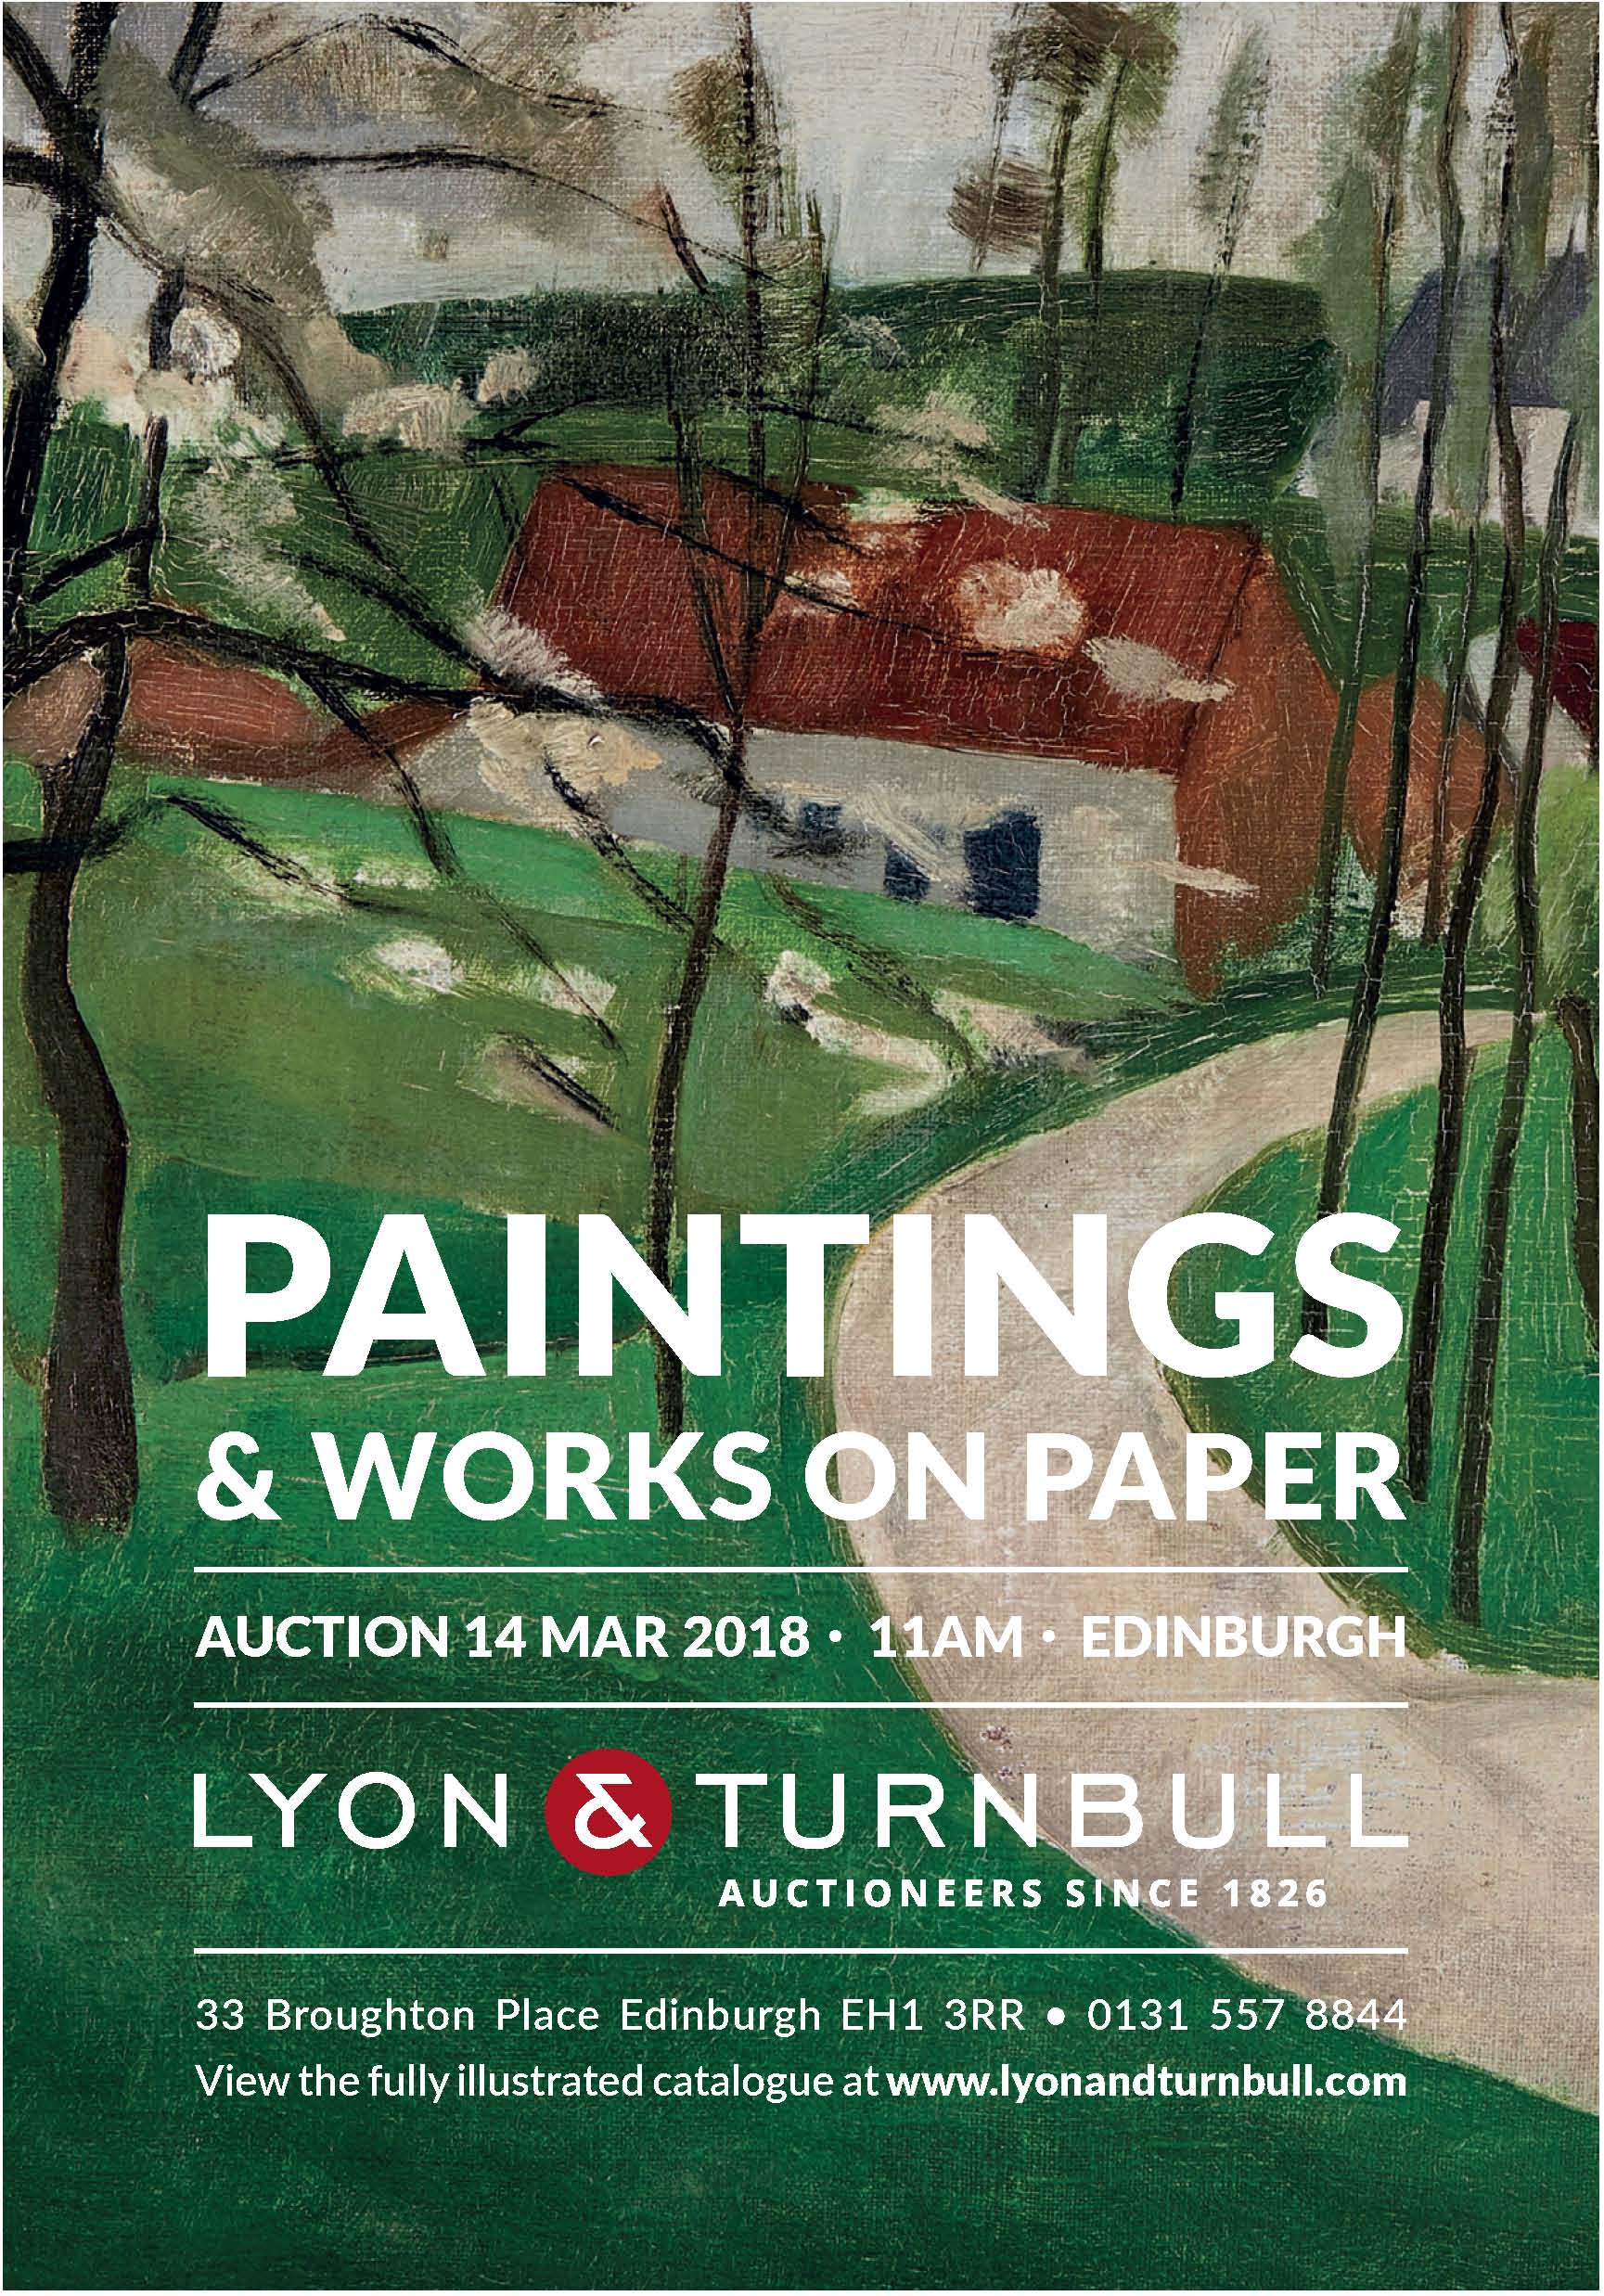 Lyon & Turnbull - Painting and Works on Paper.jpg